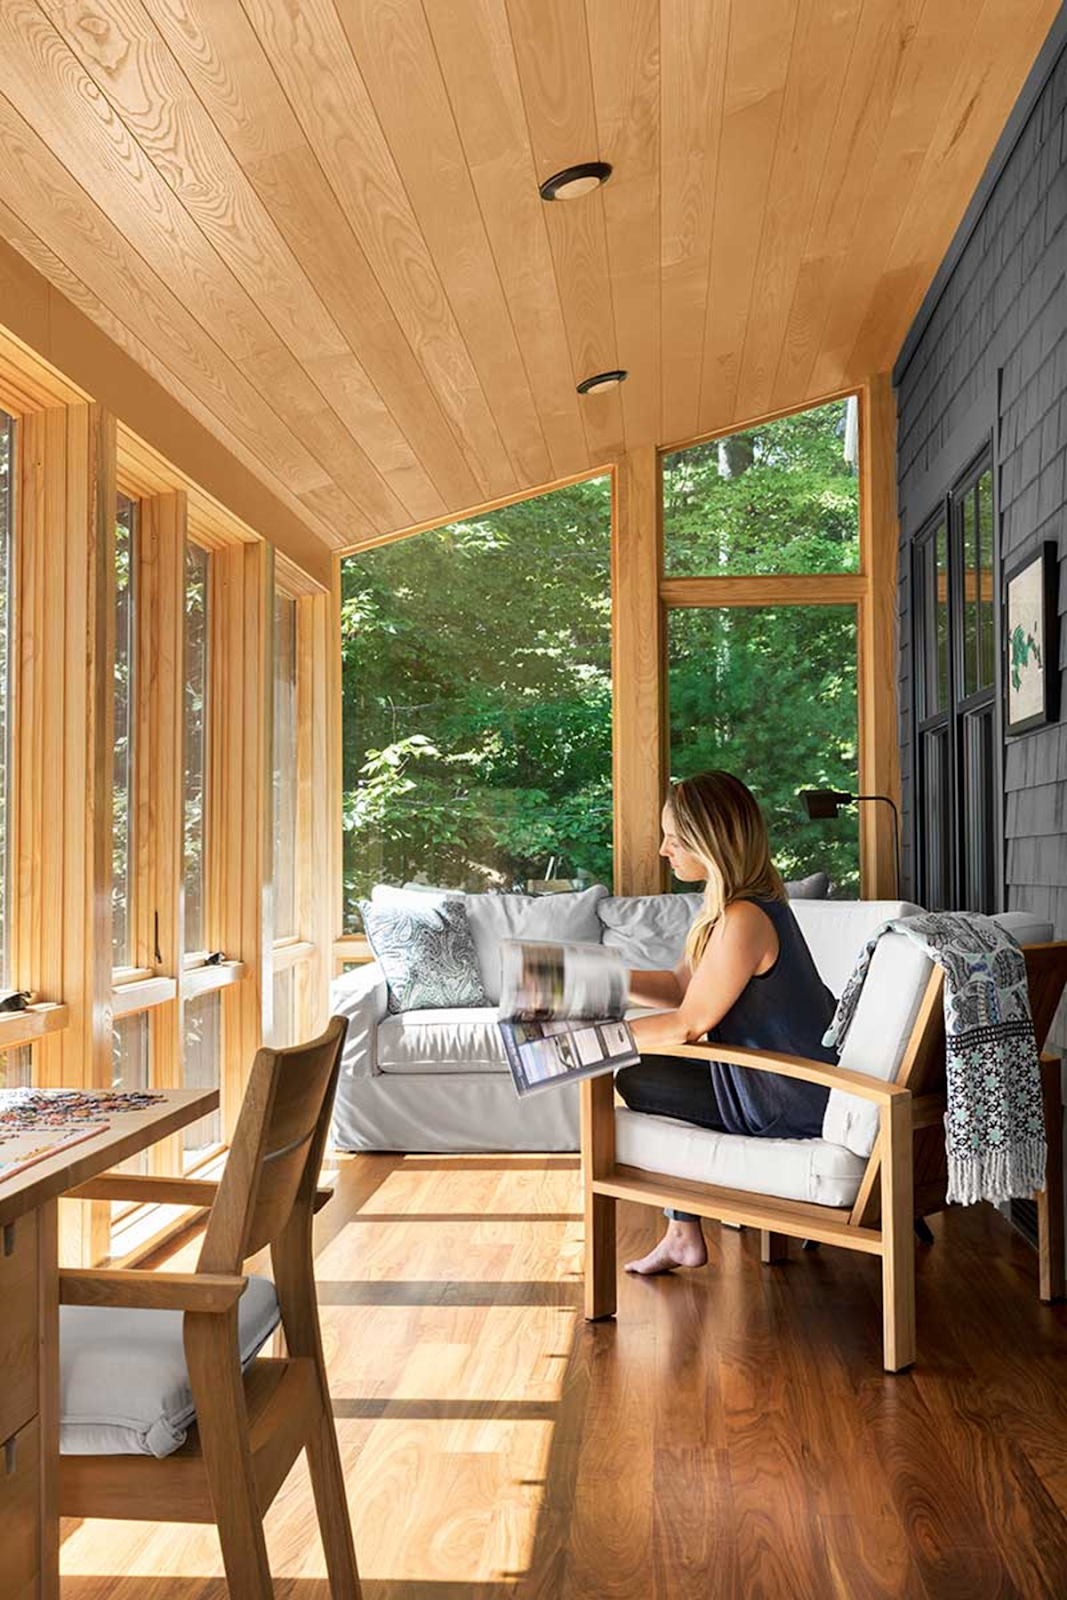 The picture depicts a person sitting on a chair, flipping through a magazine. There are numerous windows in this space, letting in beautiful, natural light.